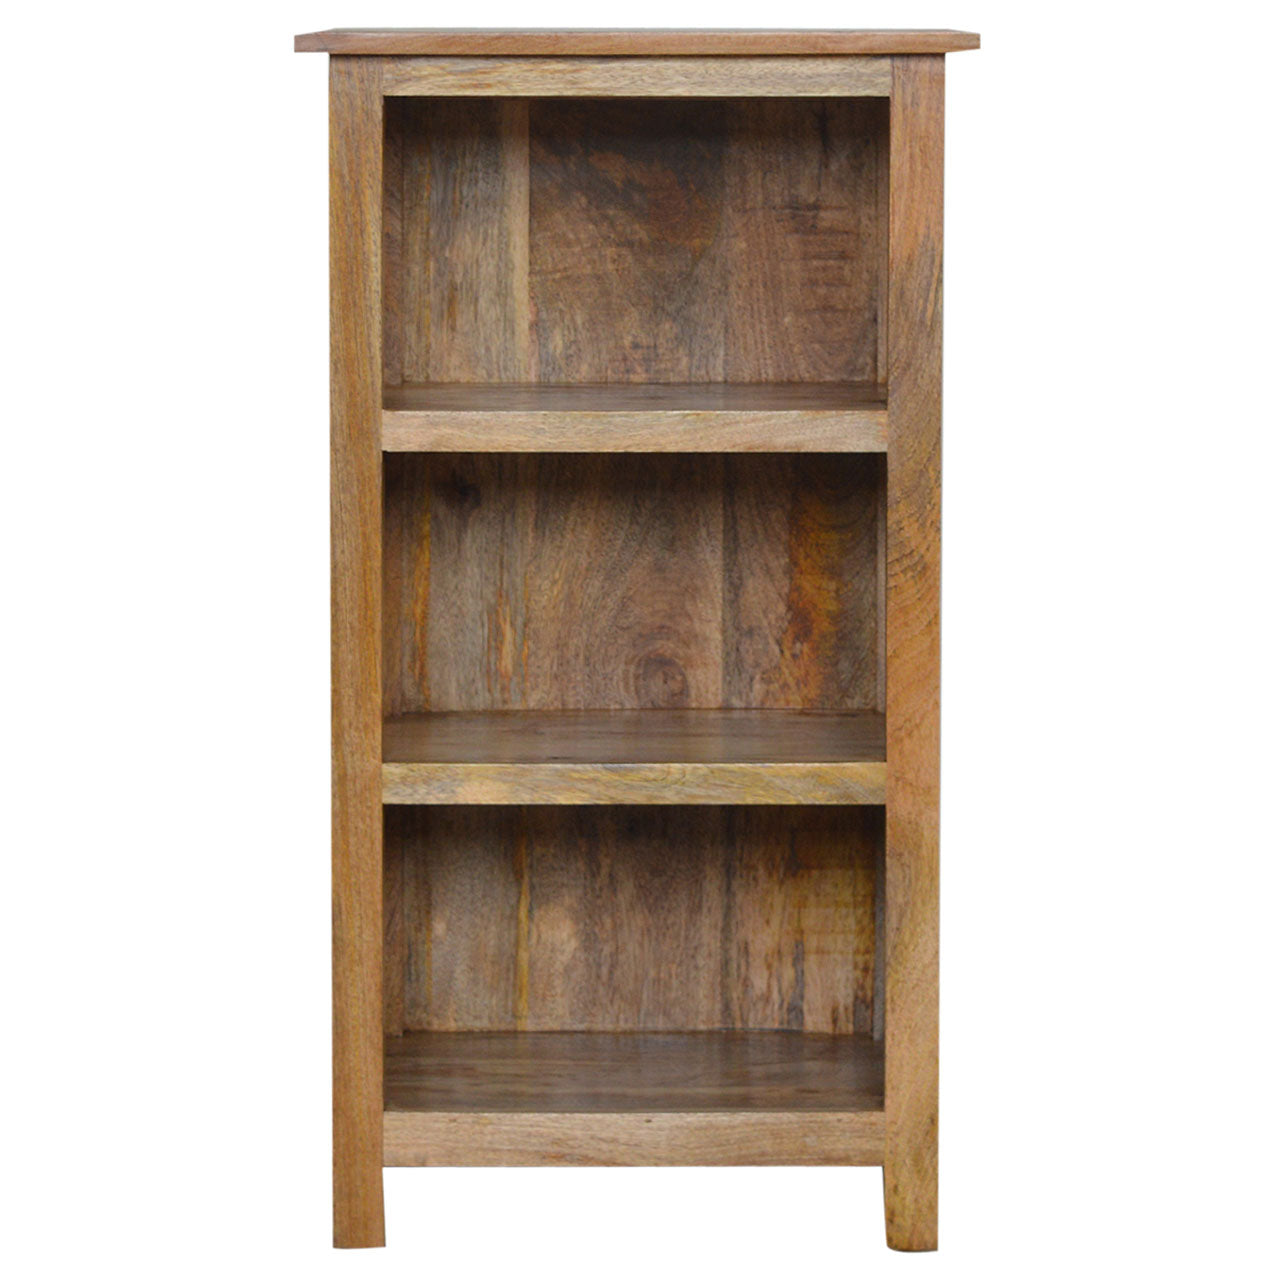 View Country Style Mini Bookcase information